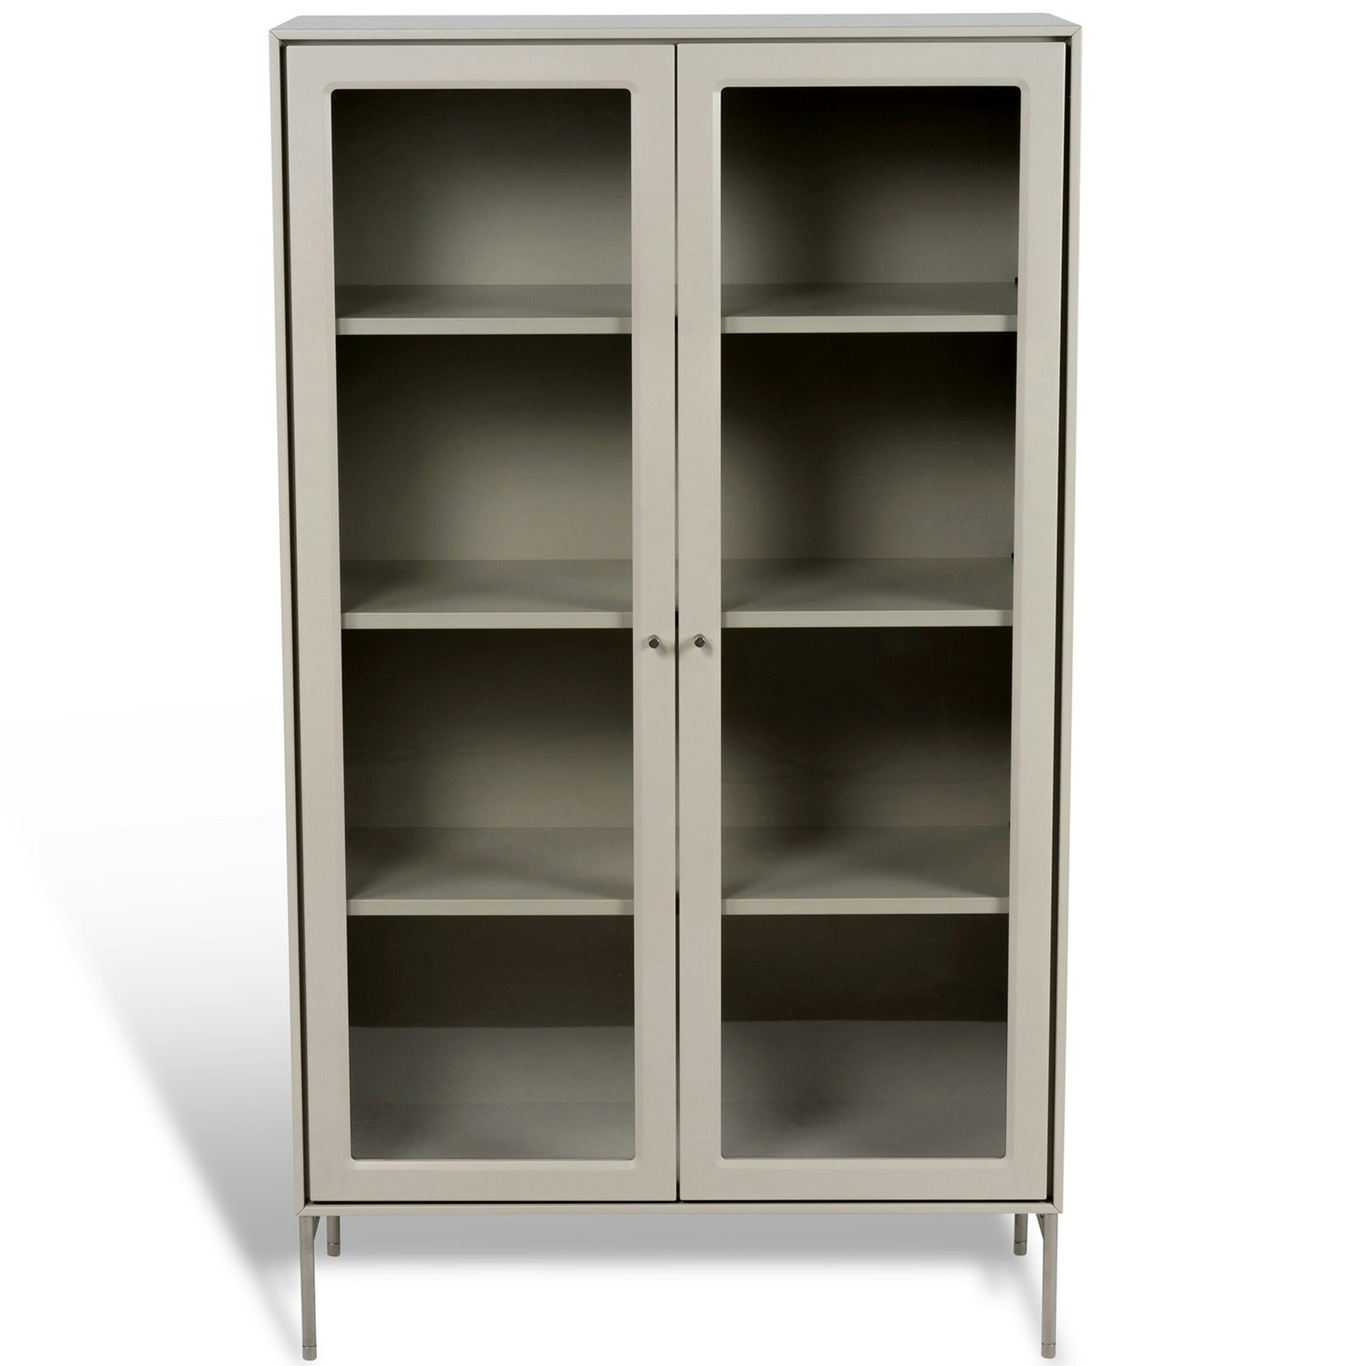 Volt Cabinet With Glass Doors 130 cm, Beige/Stainless Steel